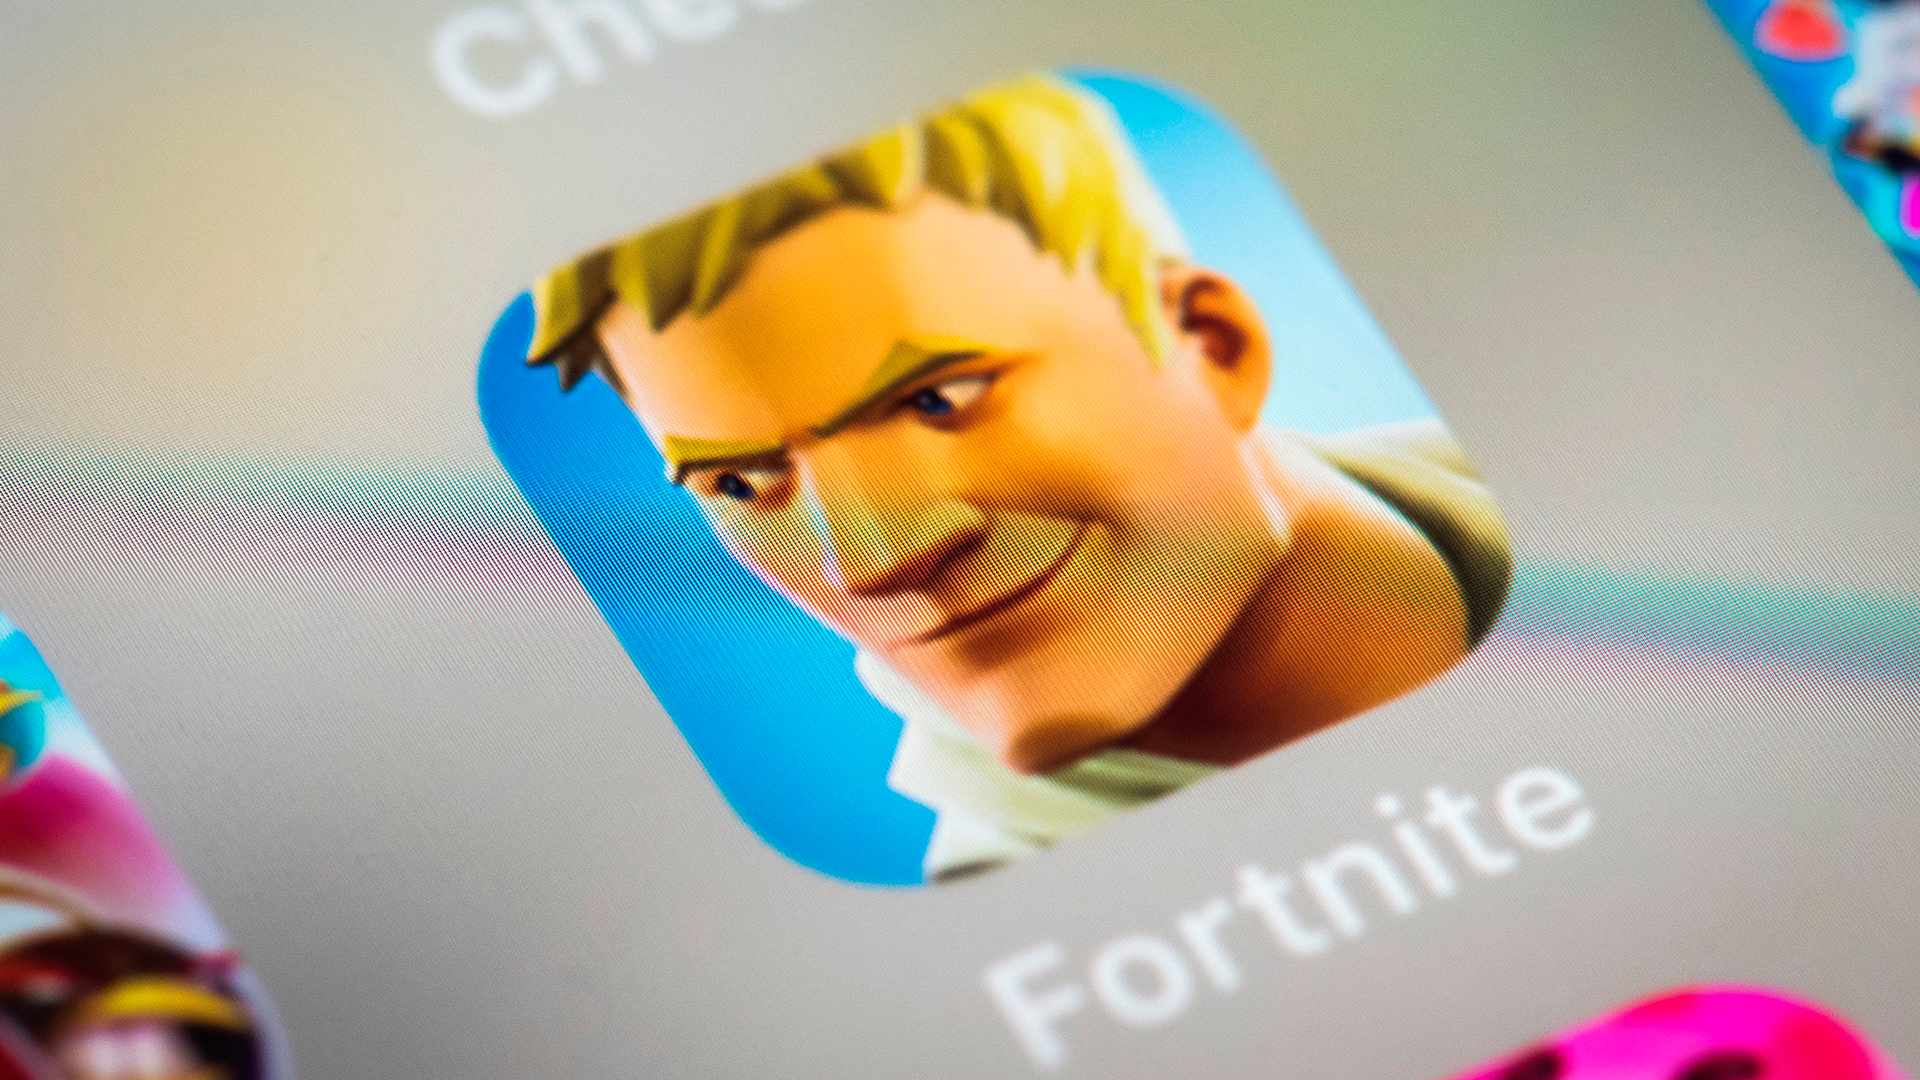 Epic Won't Put Fortnite On XCloud Because It Sees It As Competition